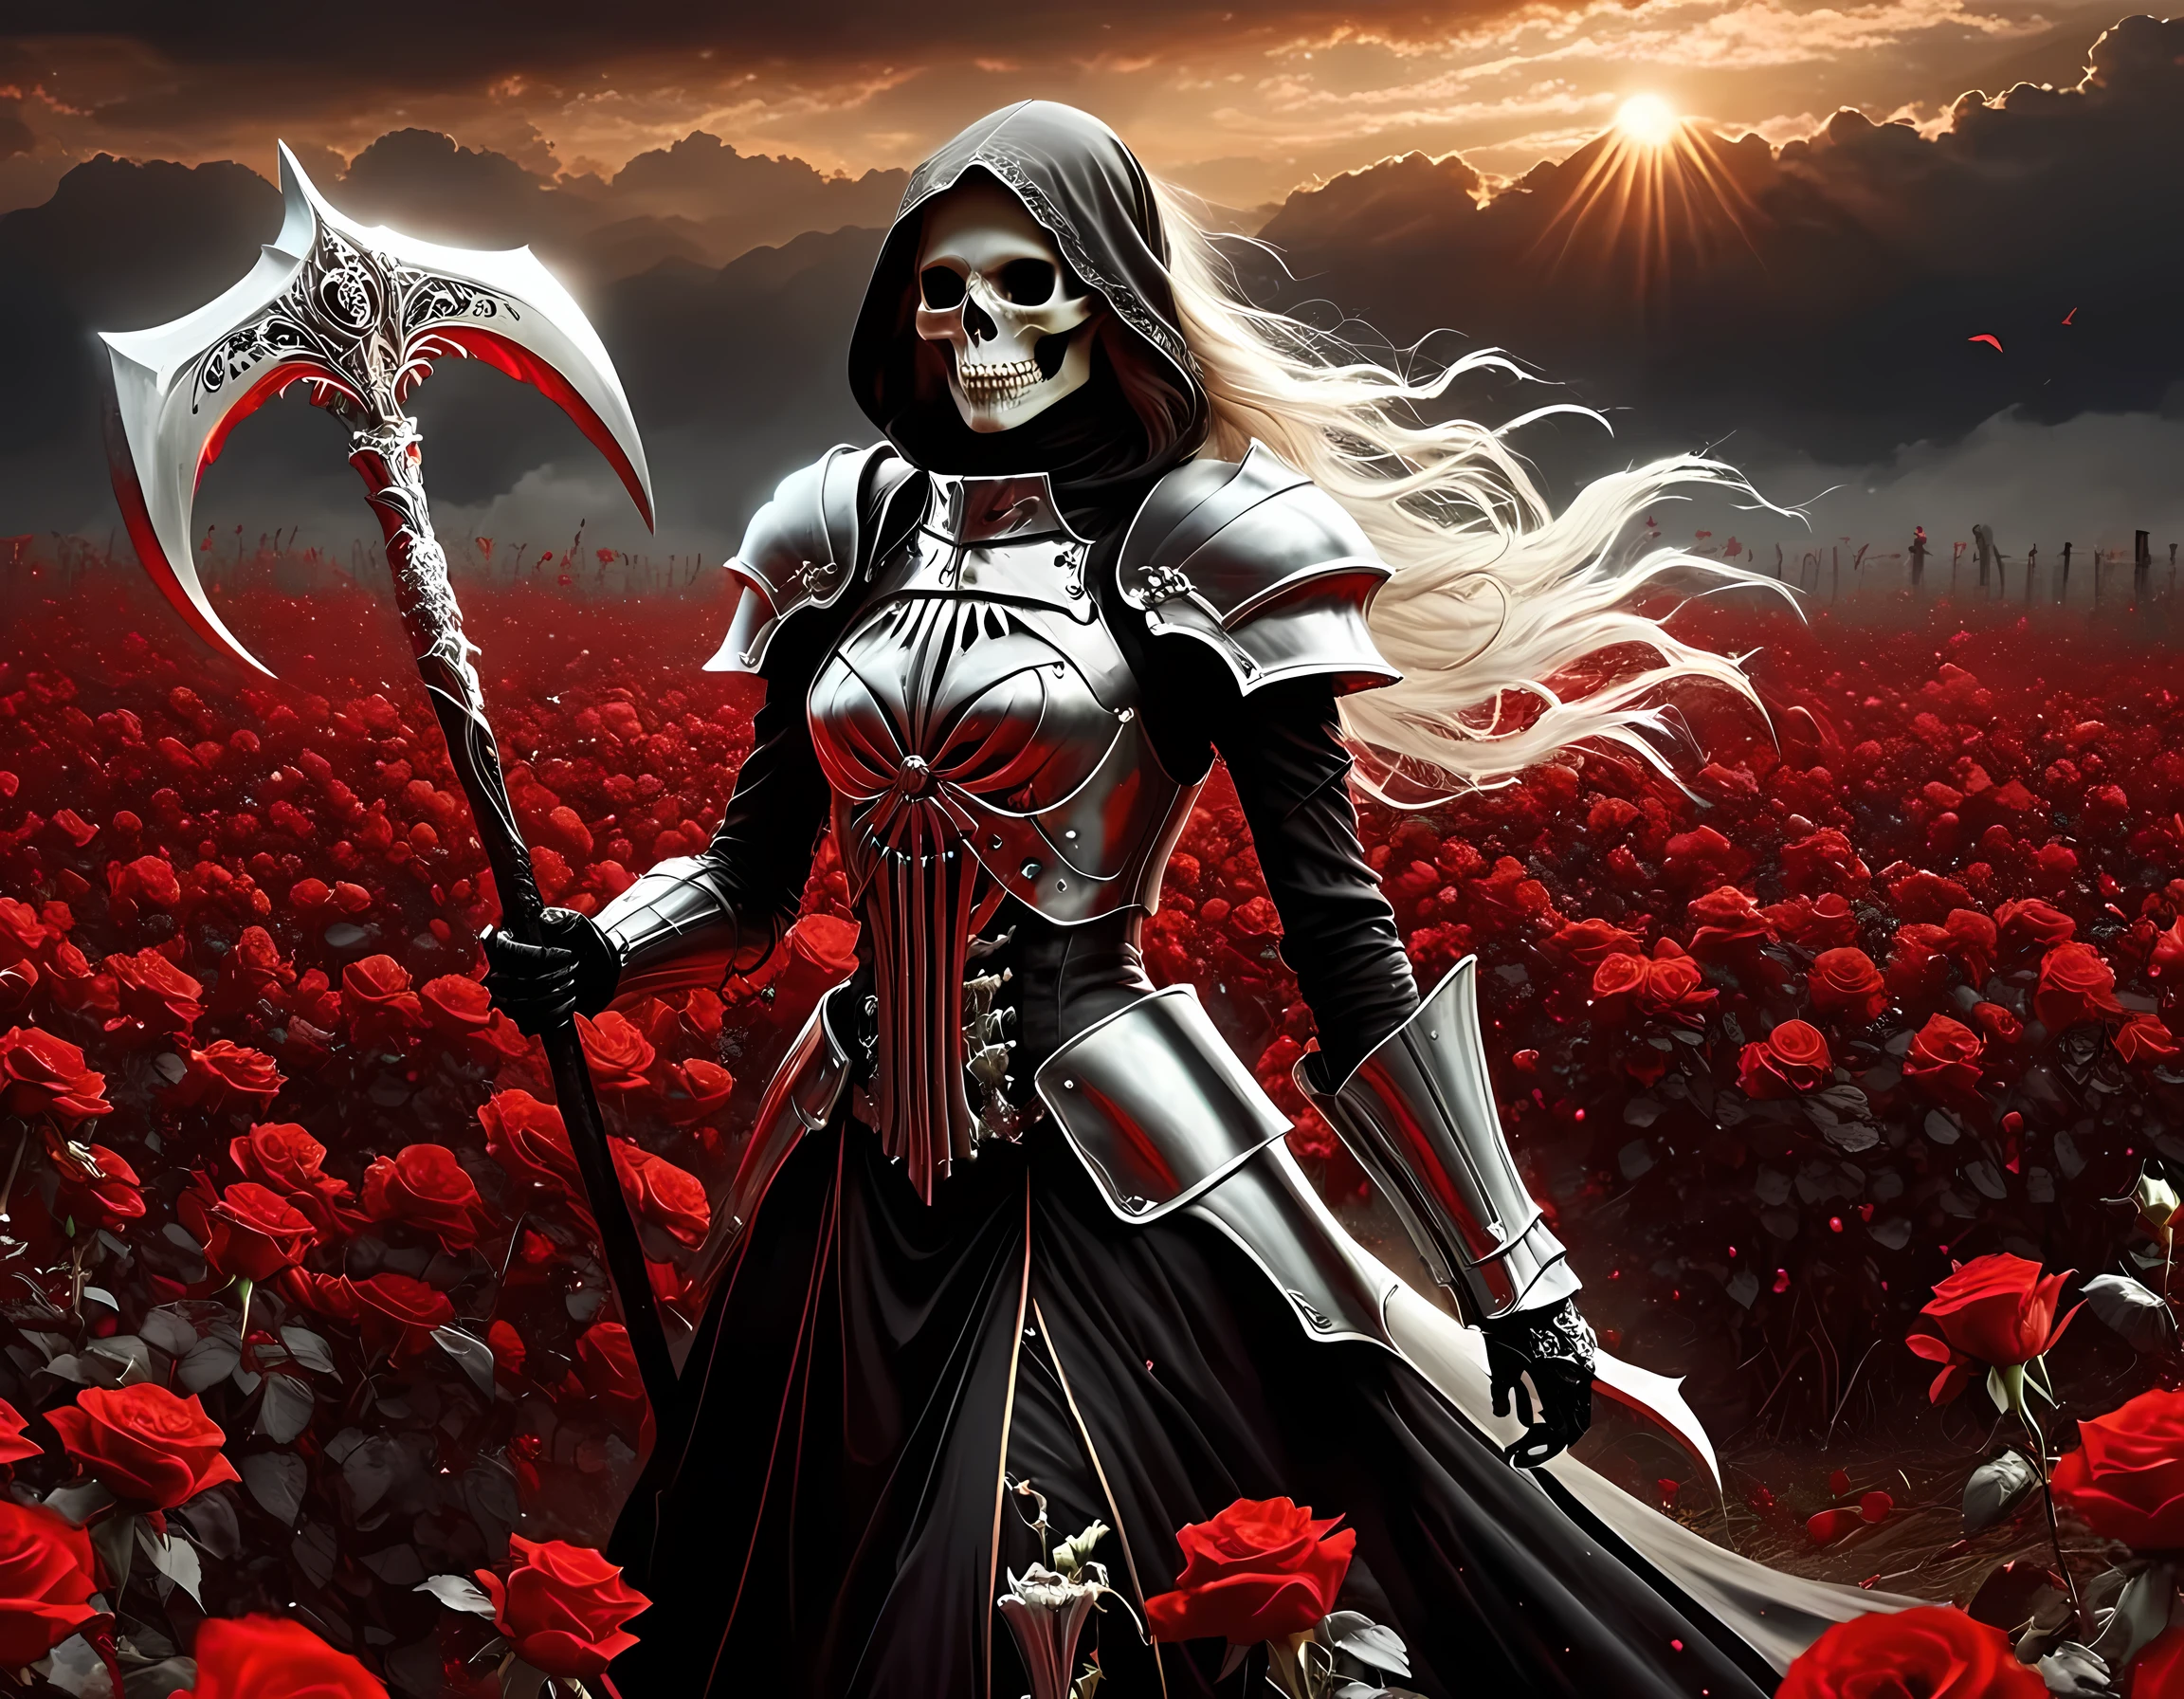 dark fantasy art, a female skeletal grim reaper in a field of white roses, the reaper has (skeletal head: 1.3) , long (white: 1.2) hair , red glowing eyes, she wears black robes, and black armor dress, ArmoredDress, flowing robes, she holds a scythe, in her arms, the scythe is dripping blood, a field of (white roses 1.4)  background, dynamic range, ultra wide shot, photorealism, depth of field, hyper realistic, RagingNebula